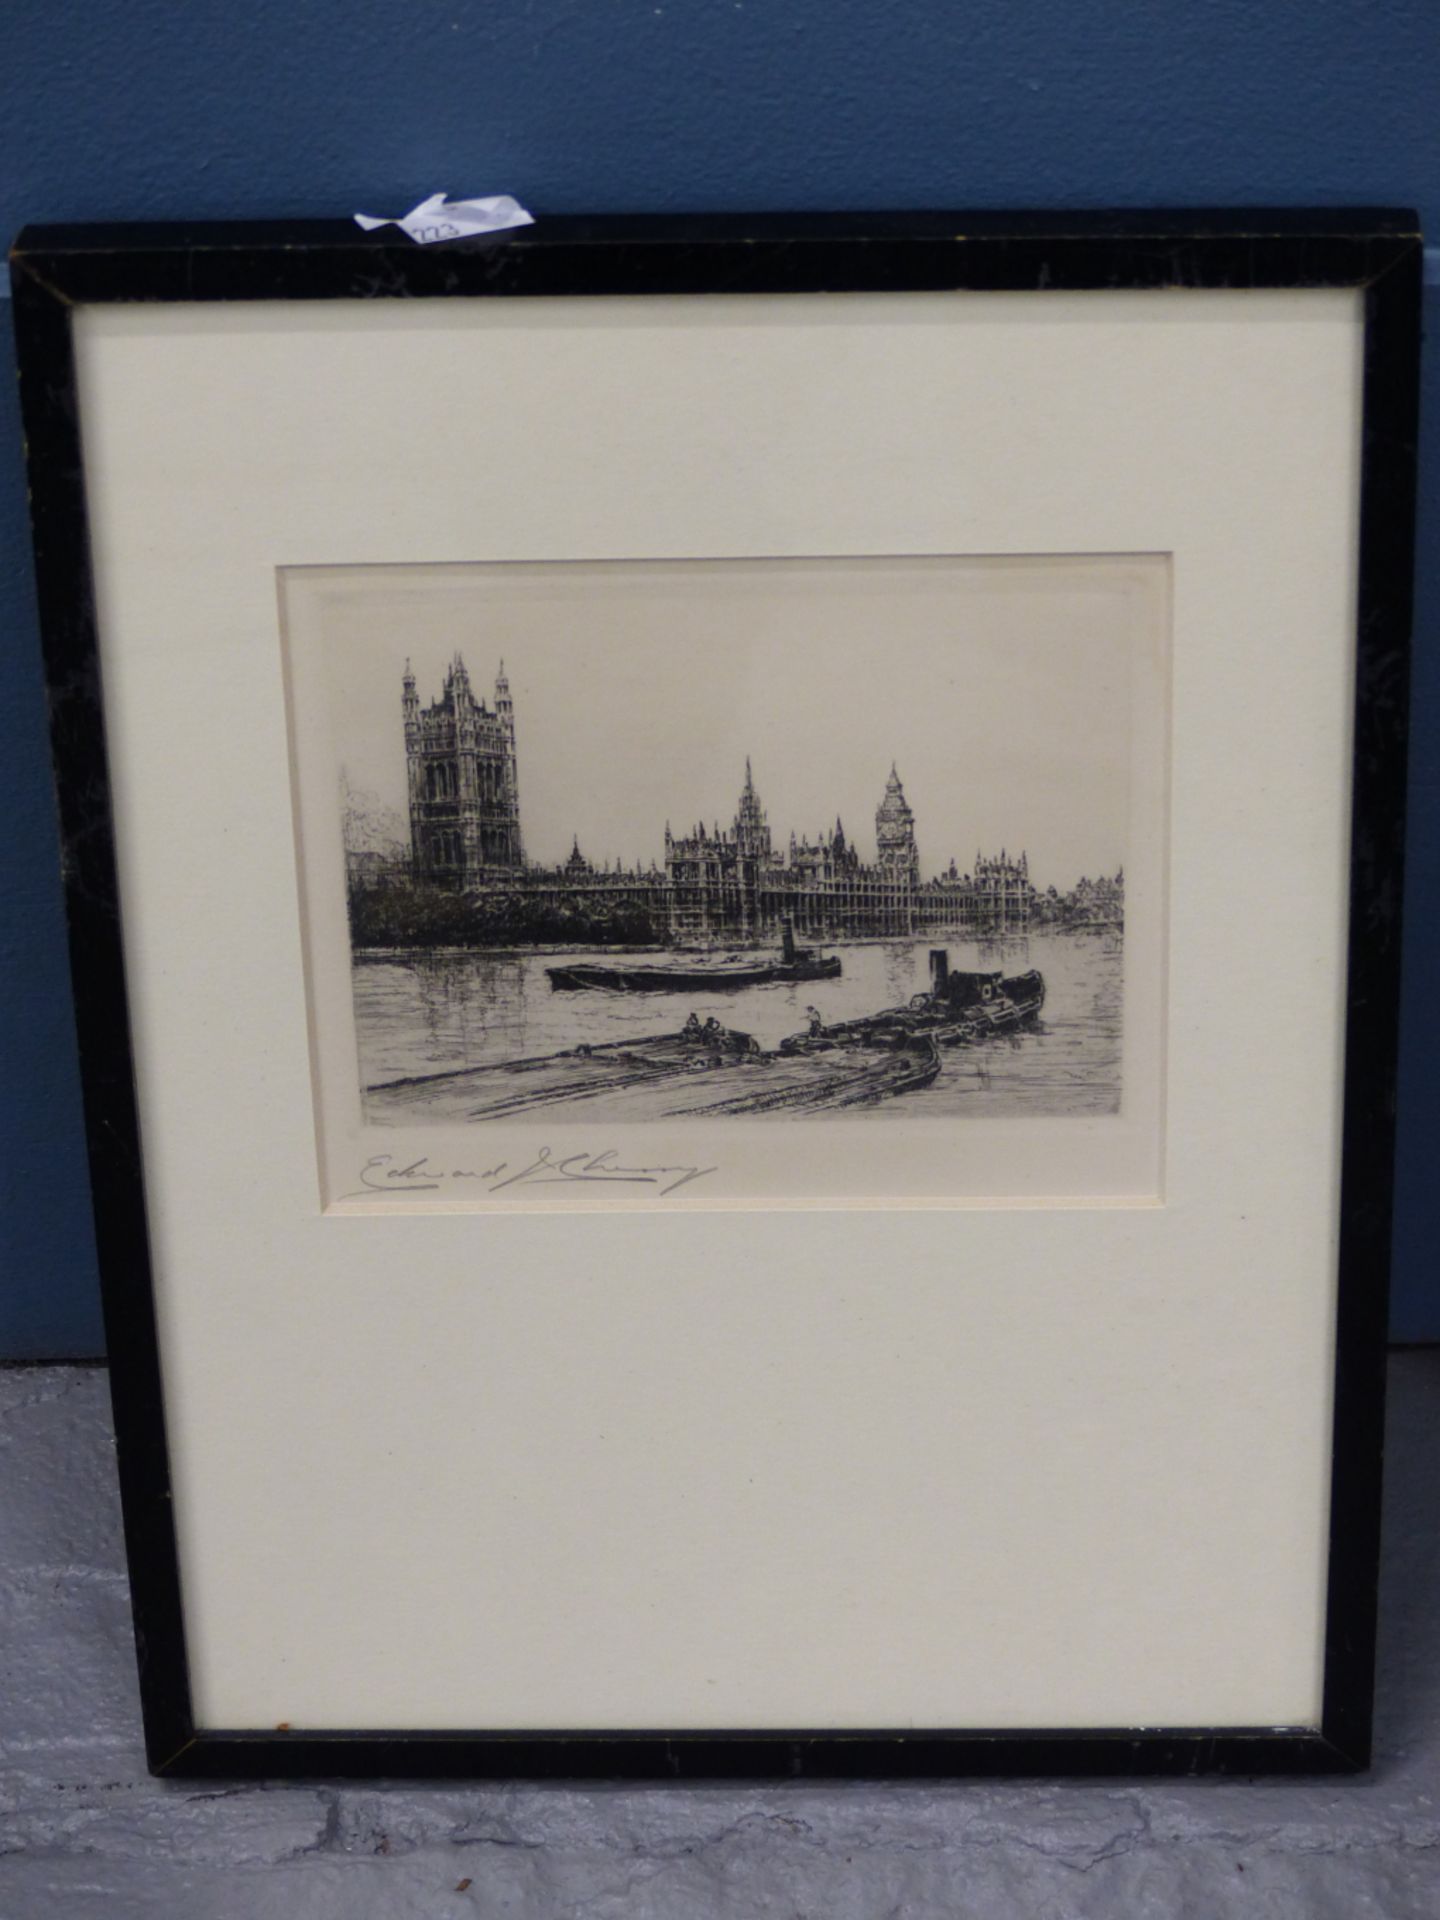 EDWARD J CHERRY. (1886-1960) ARR. THE HOUSES OF PARLIAMENT . ETCHING. PENCIL SIGNED ARTIST PROOF - Image 5 of 7